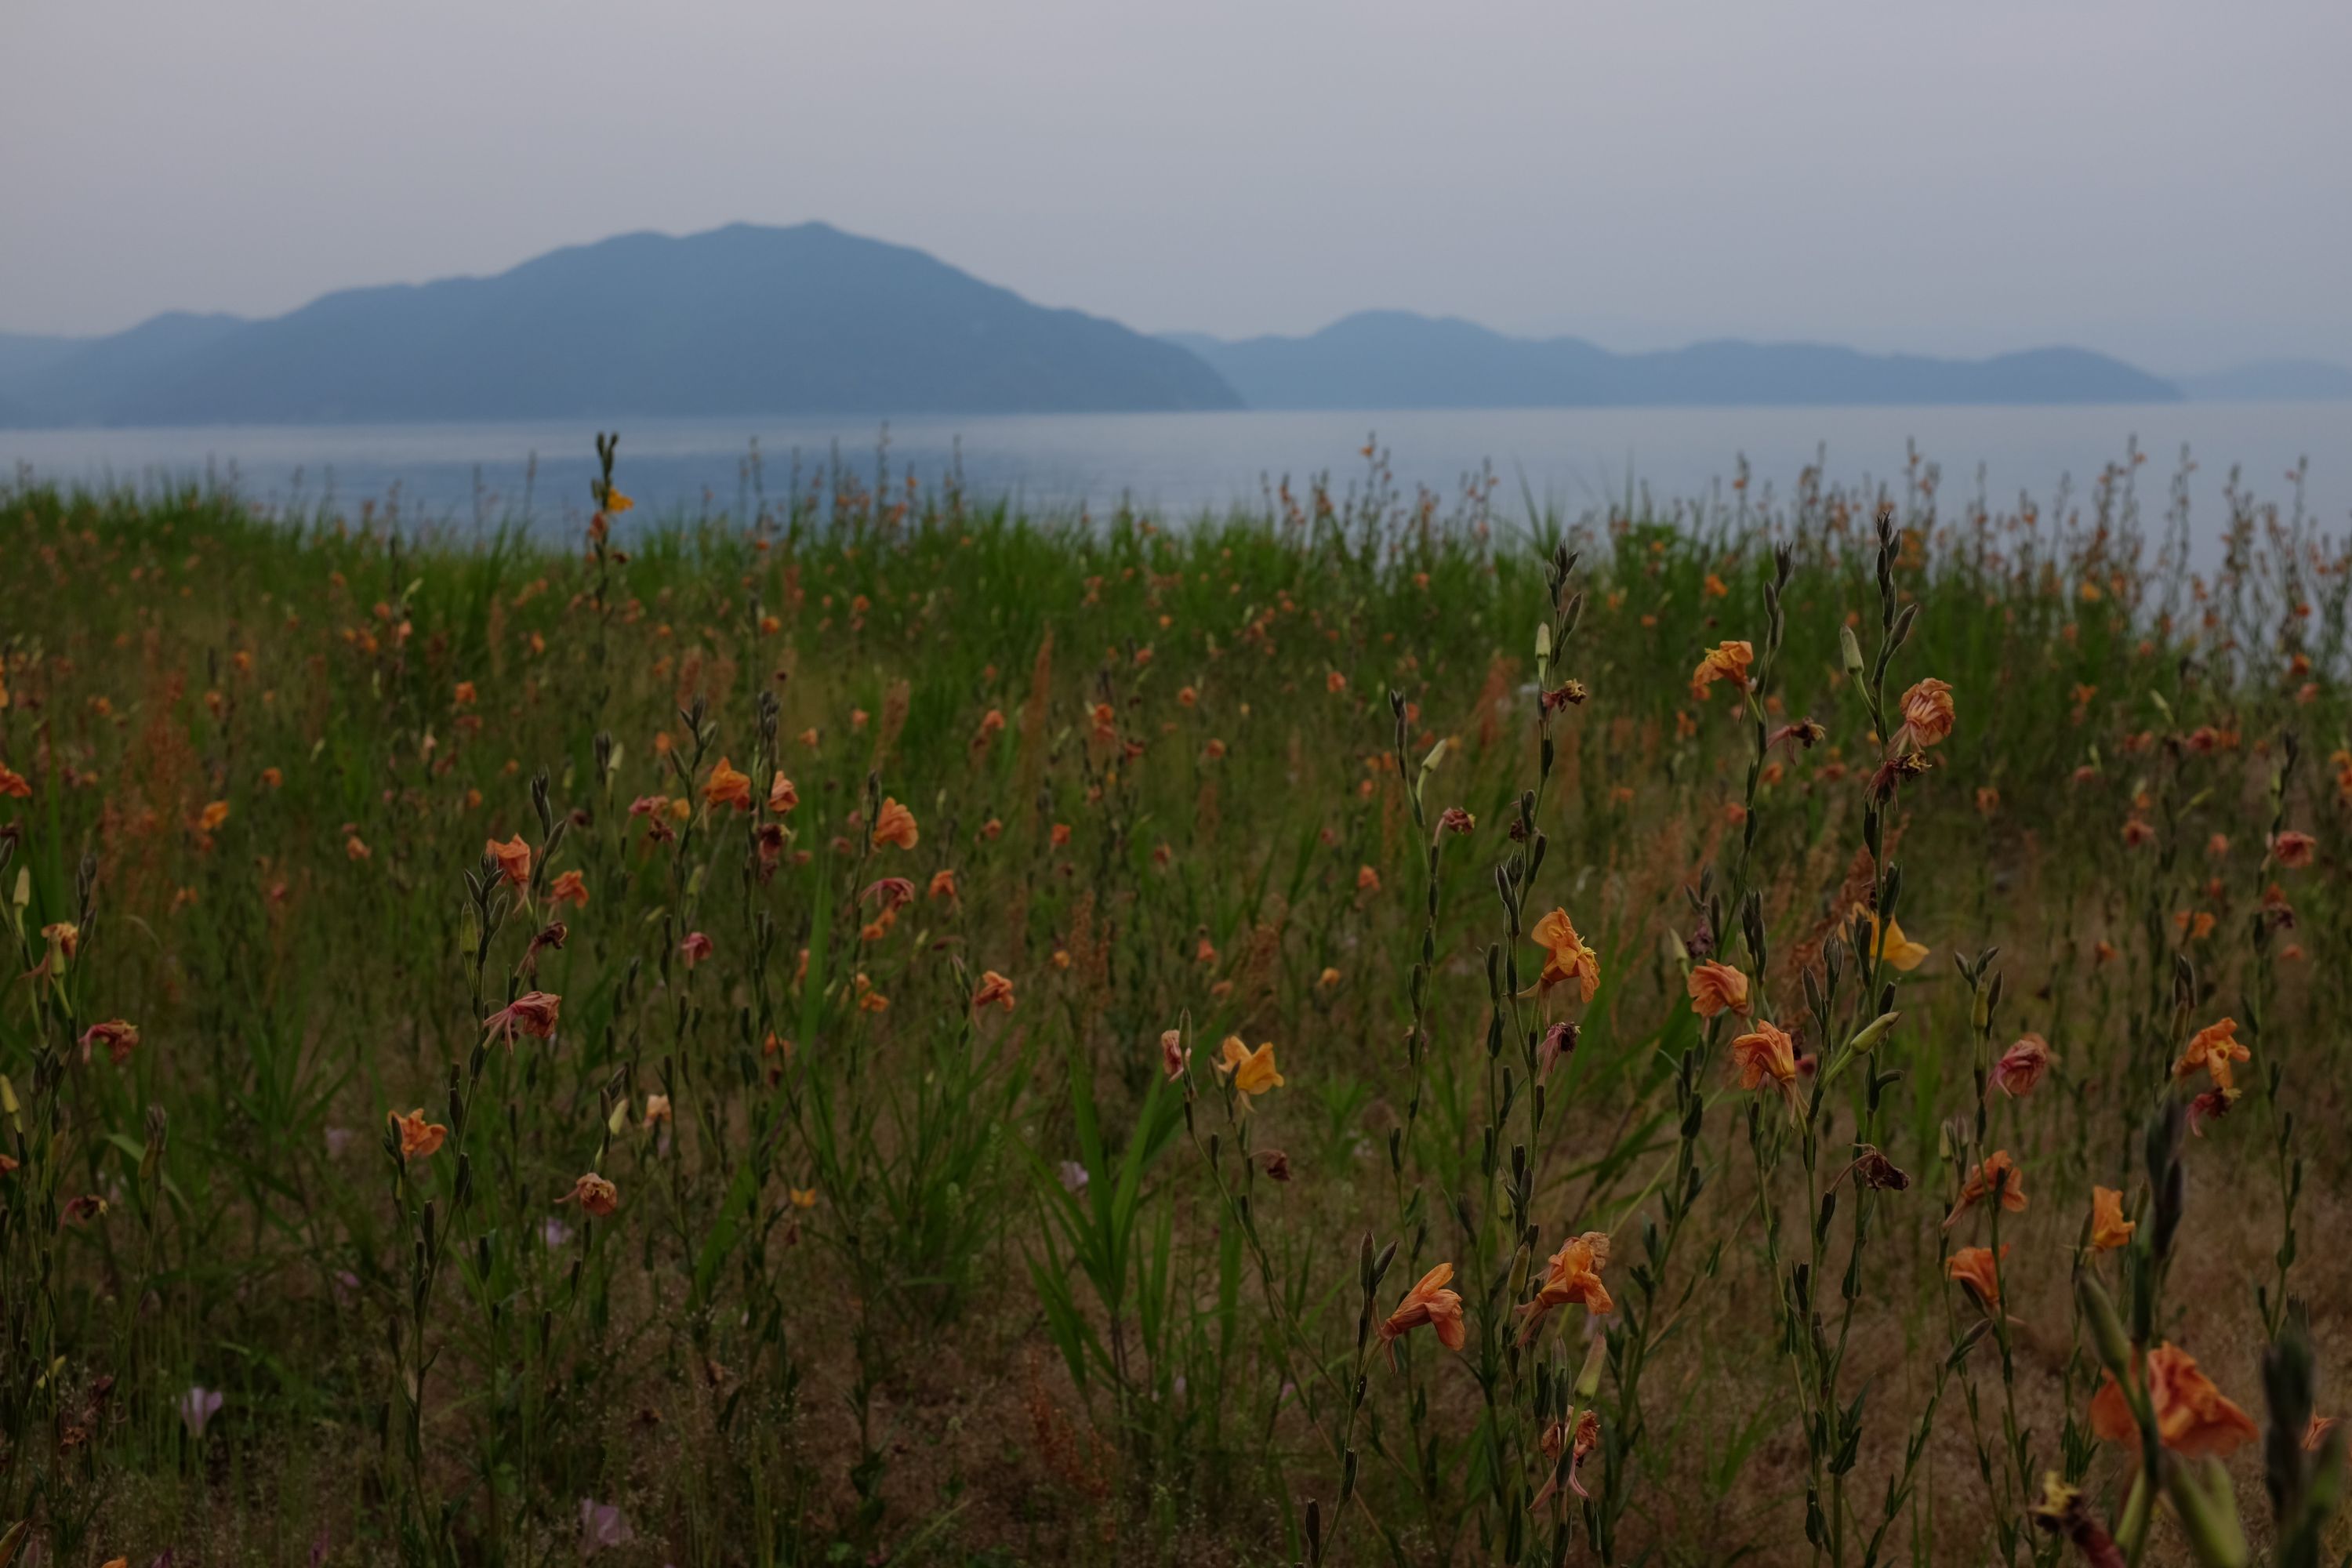 A flower-filled meadow with the lake in the background.